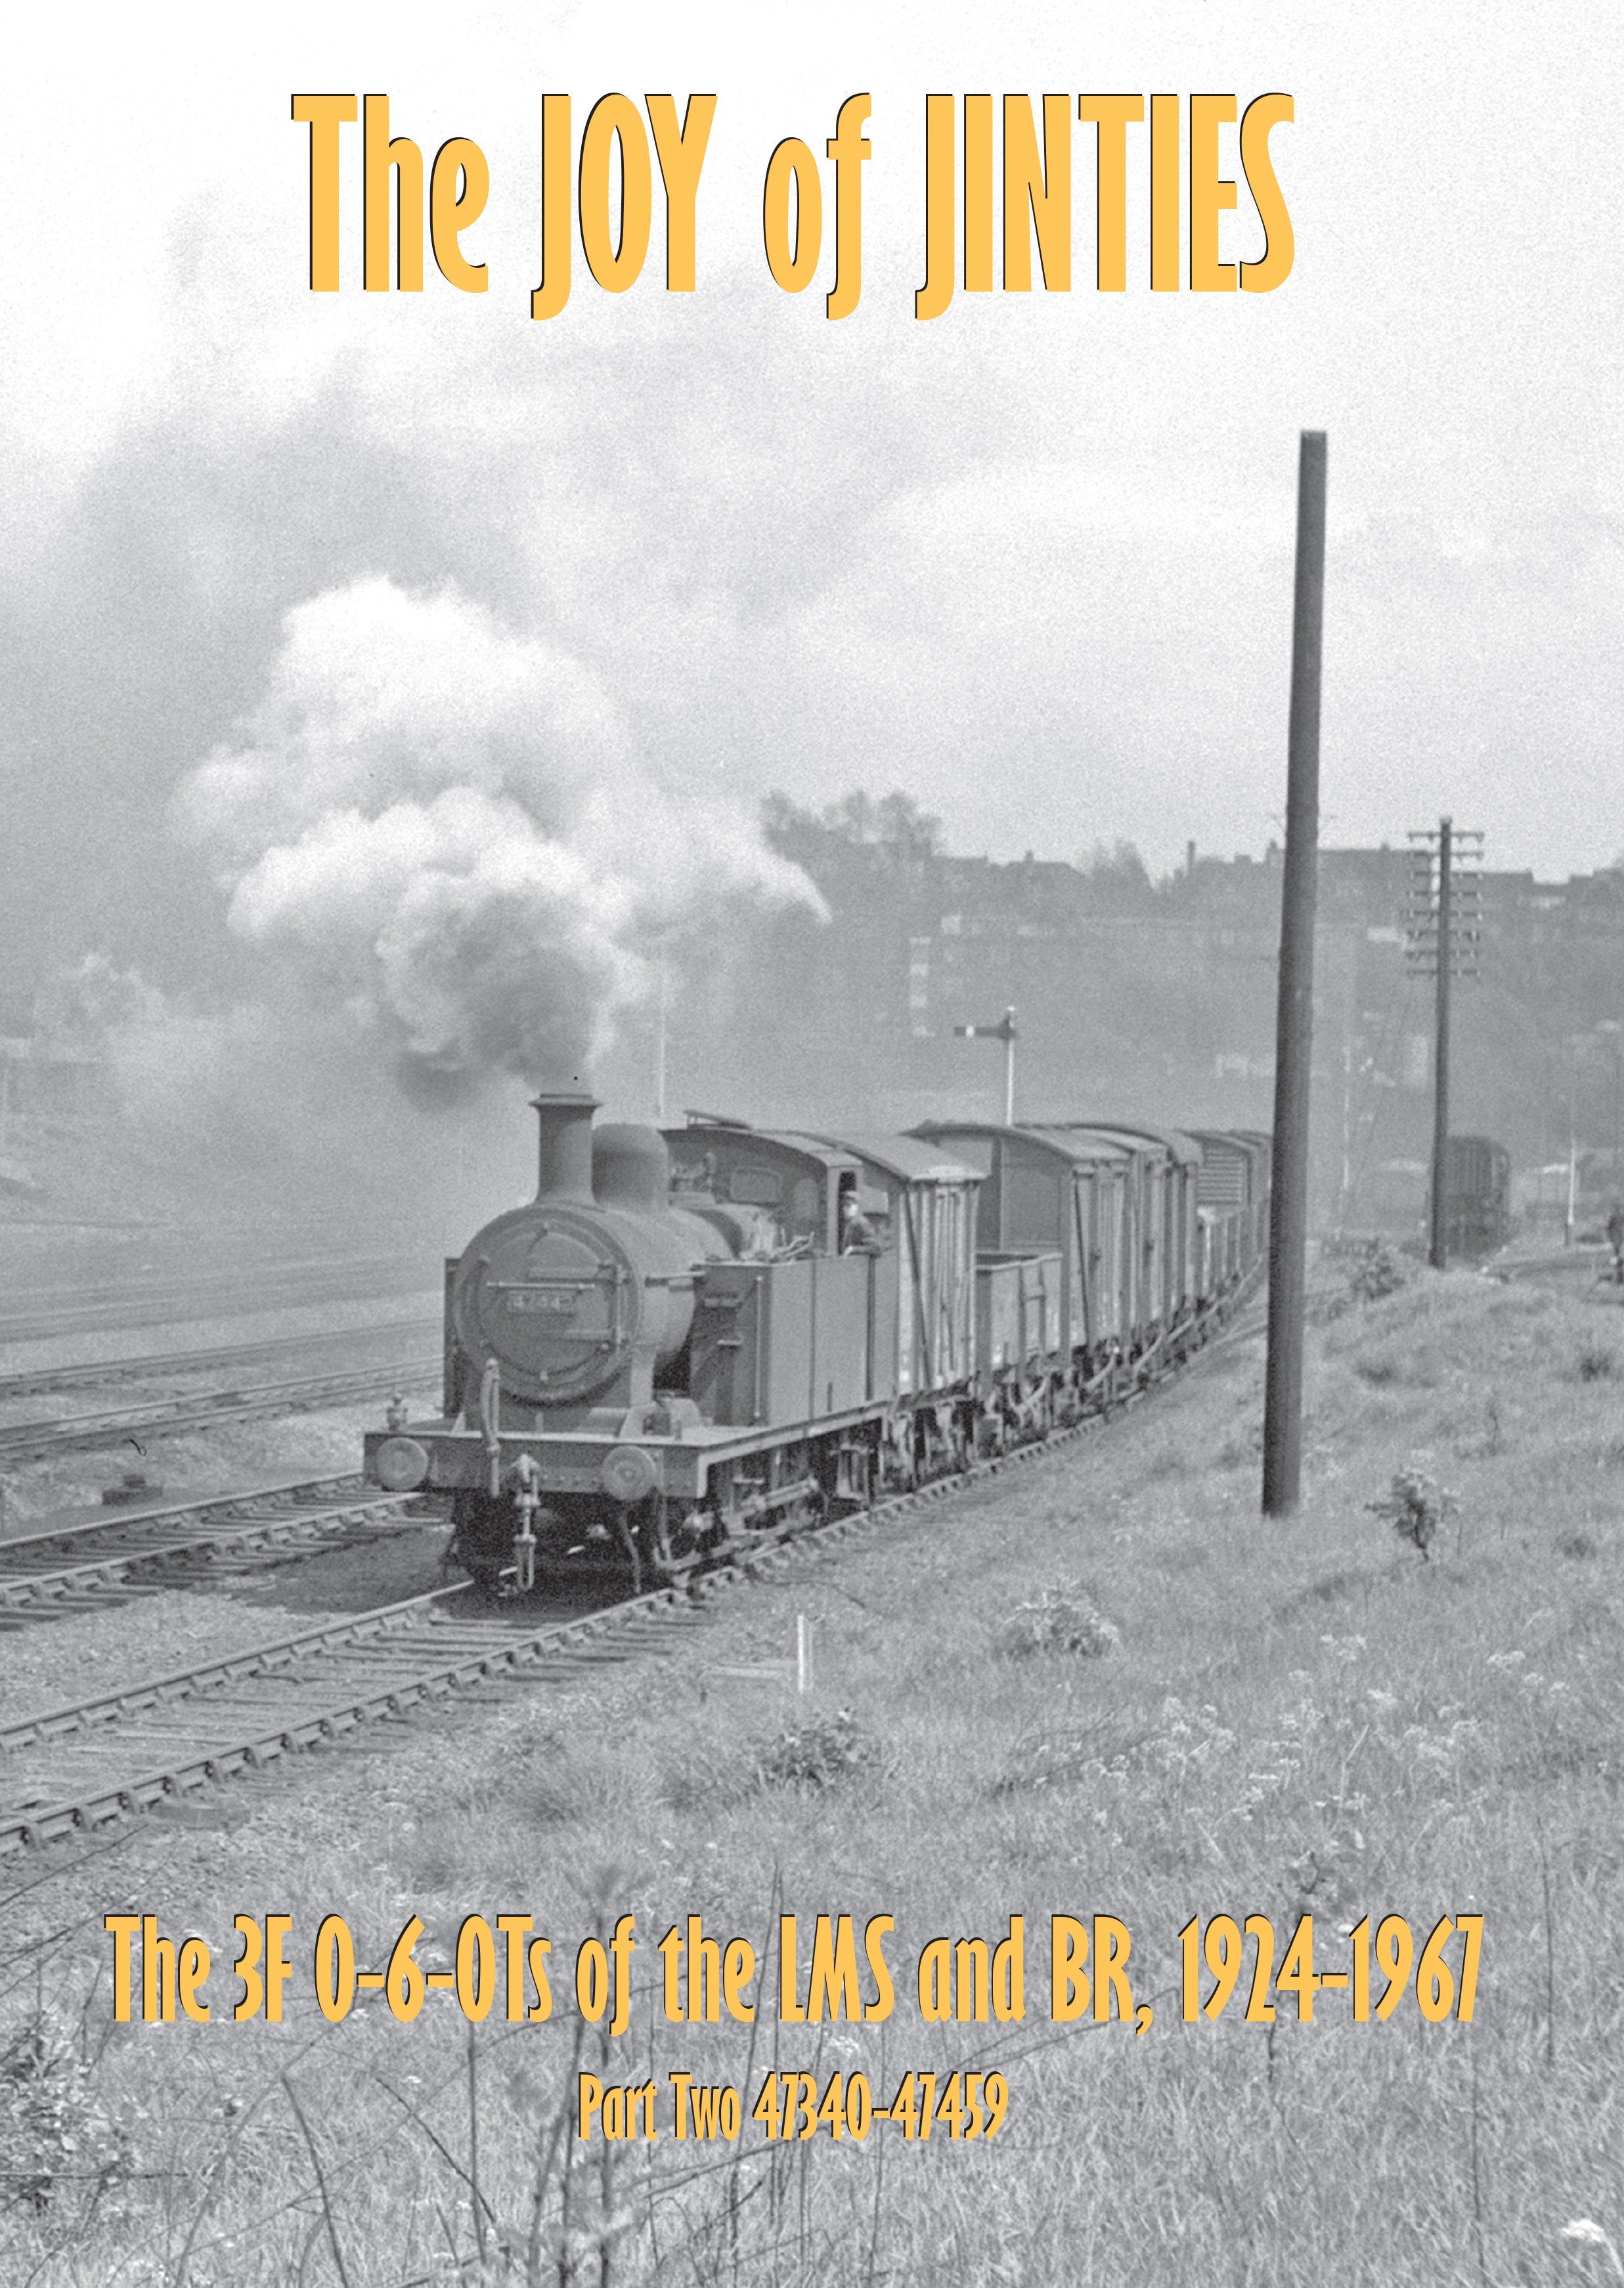 The Joy of Jinties: The 3F 0-6-0Ts of the LMS and BR, 1924-1967 Part 2: 47340-47459